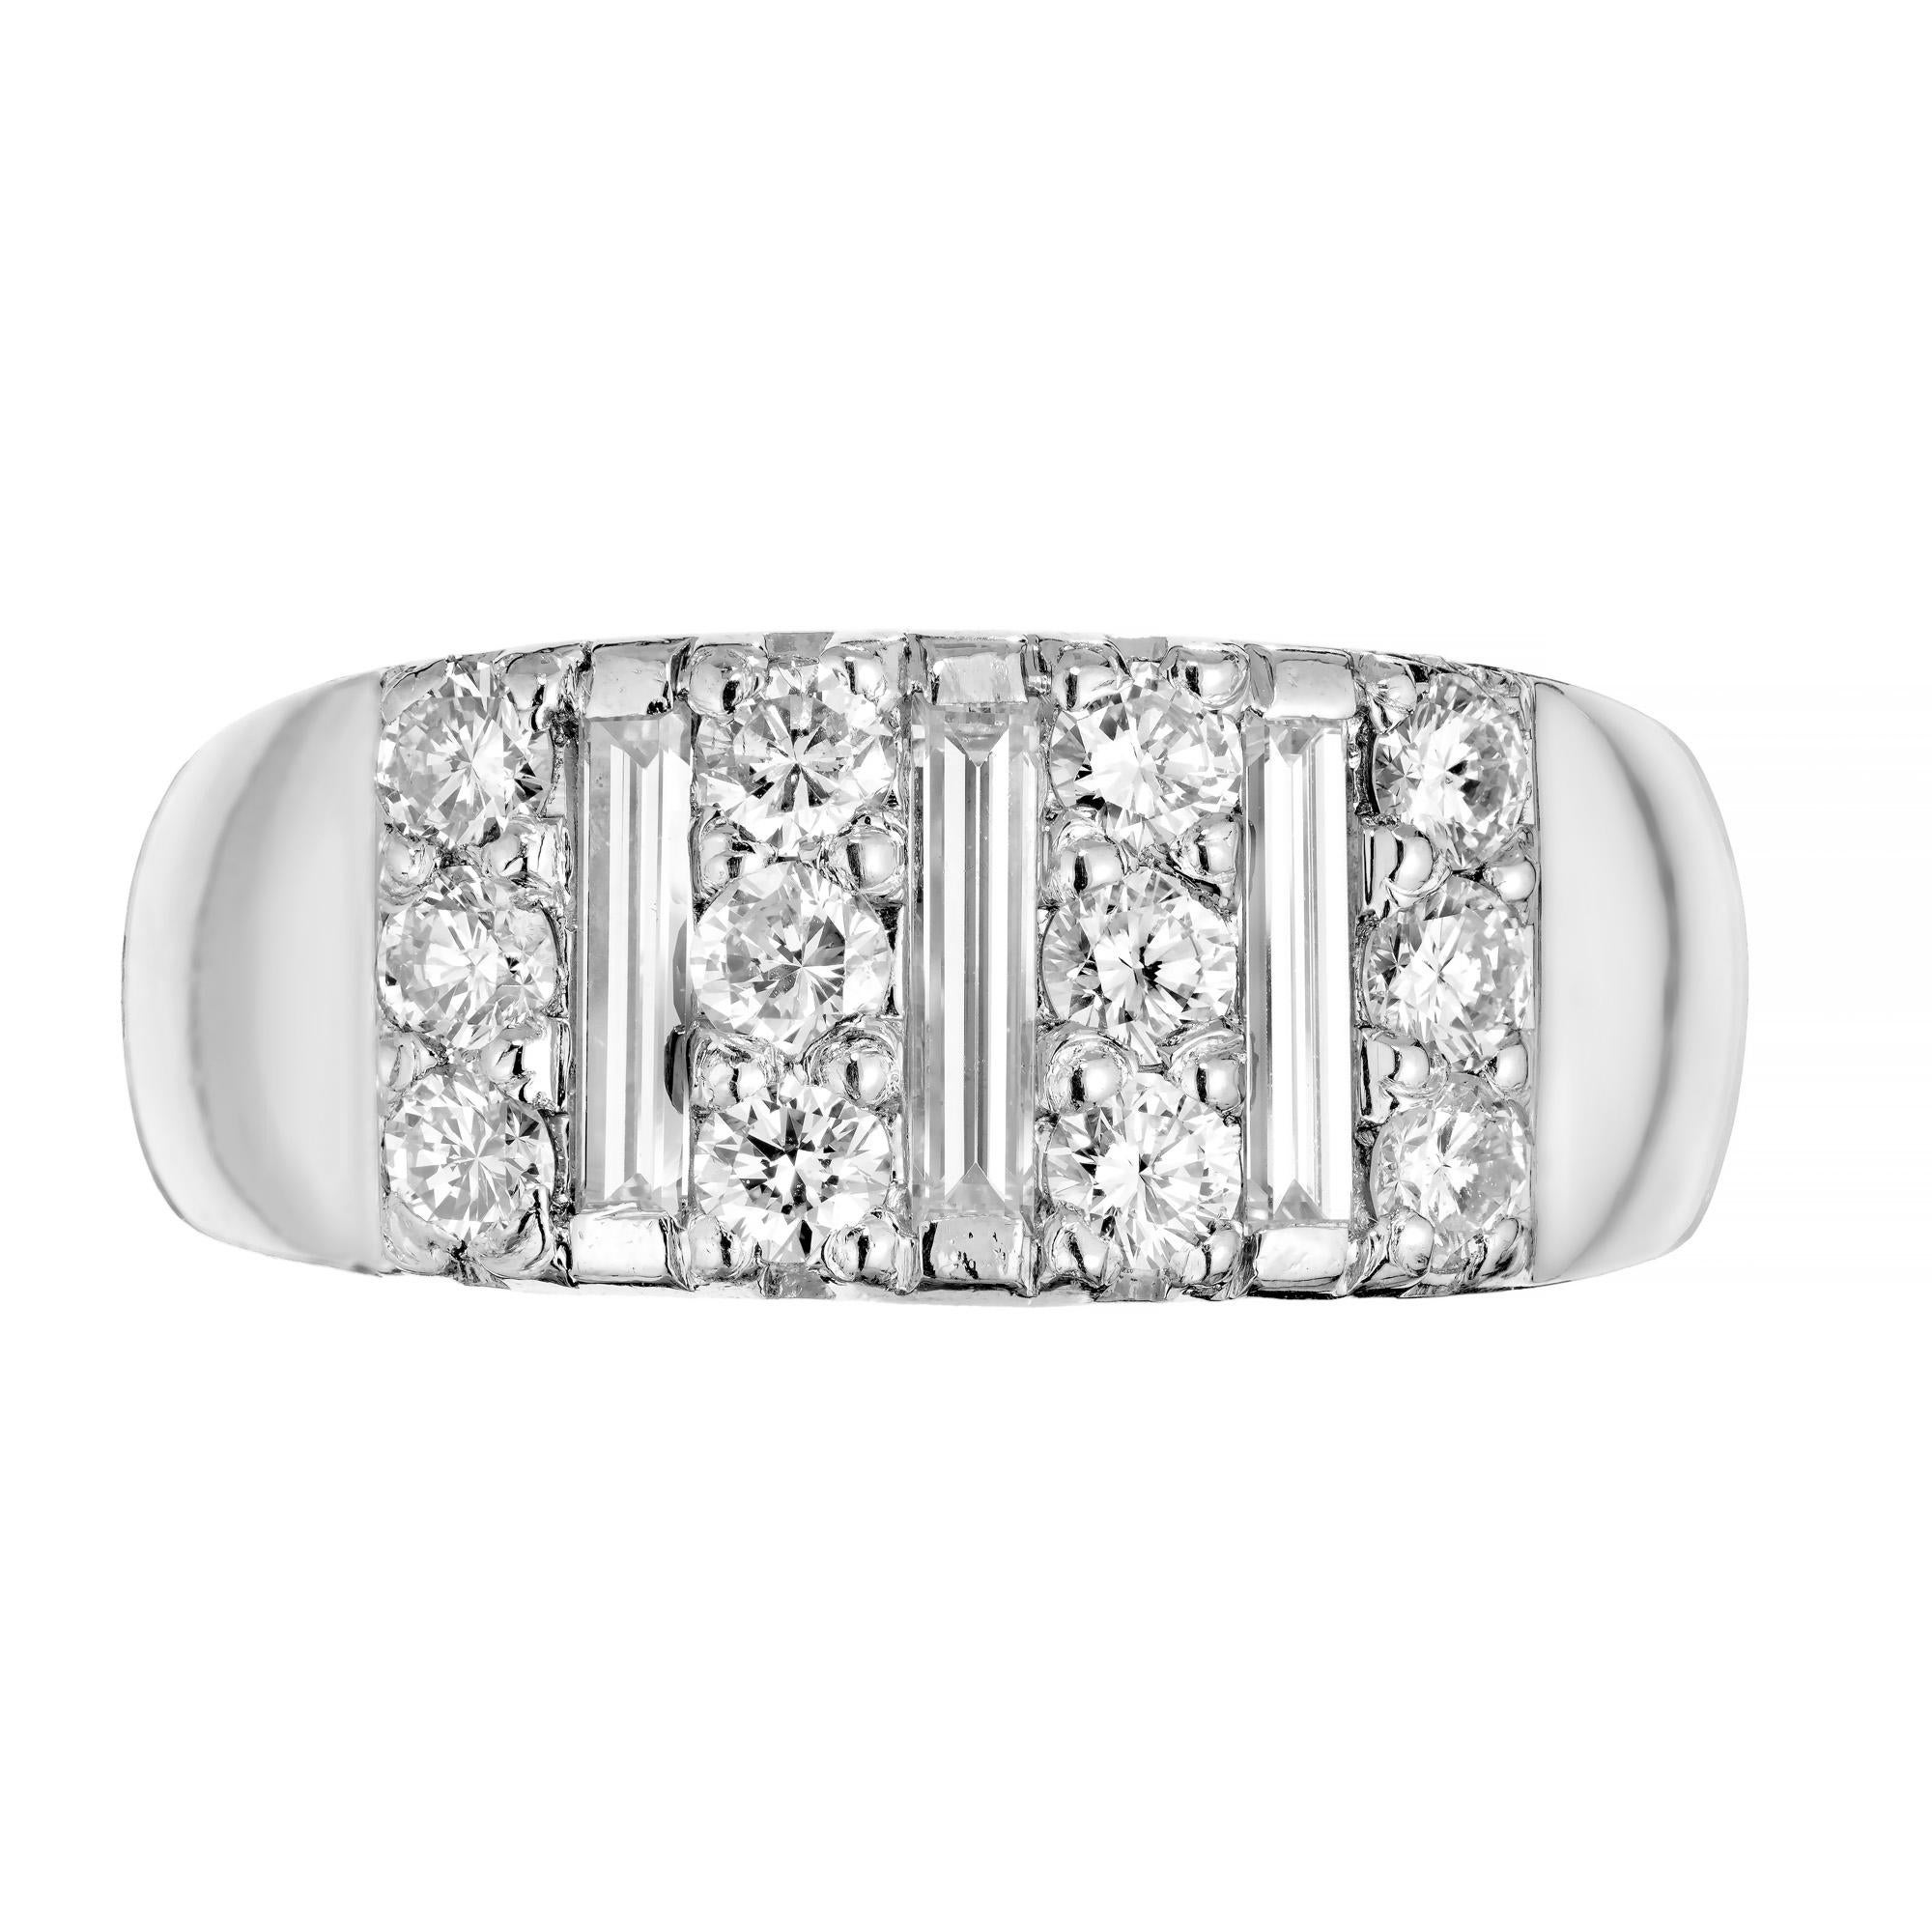 1940's Vintage late Art Deco diamond band ring. 12 full cut diamonds in four rows of three separated by three baguette cut diamonds, set in a platinum mounting. 

3 baguette cut diamonds, .10cts each, F, VS, approx. total weight .30cts
12 full cut